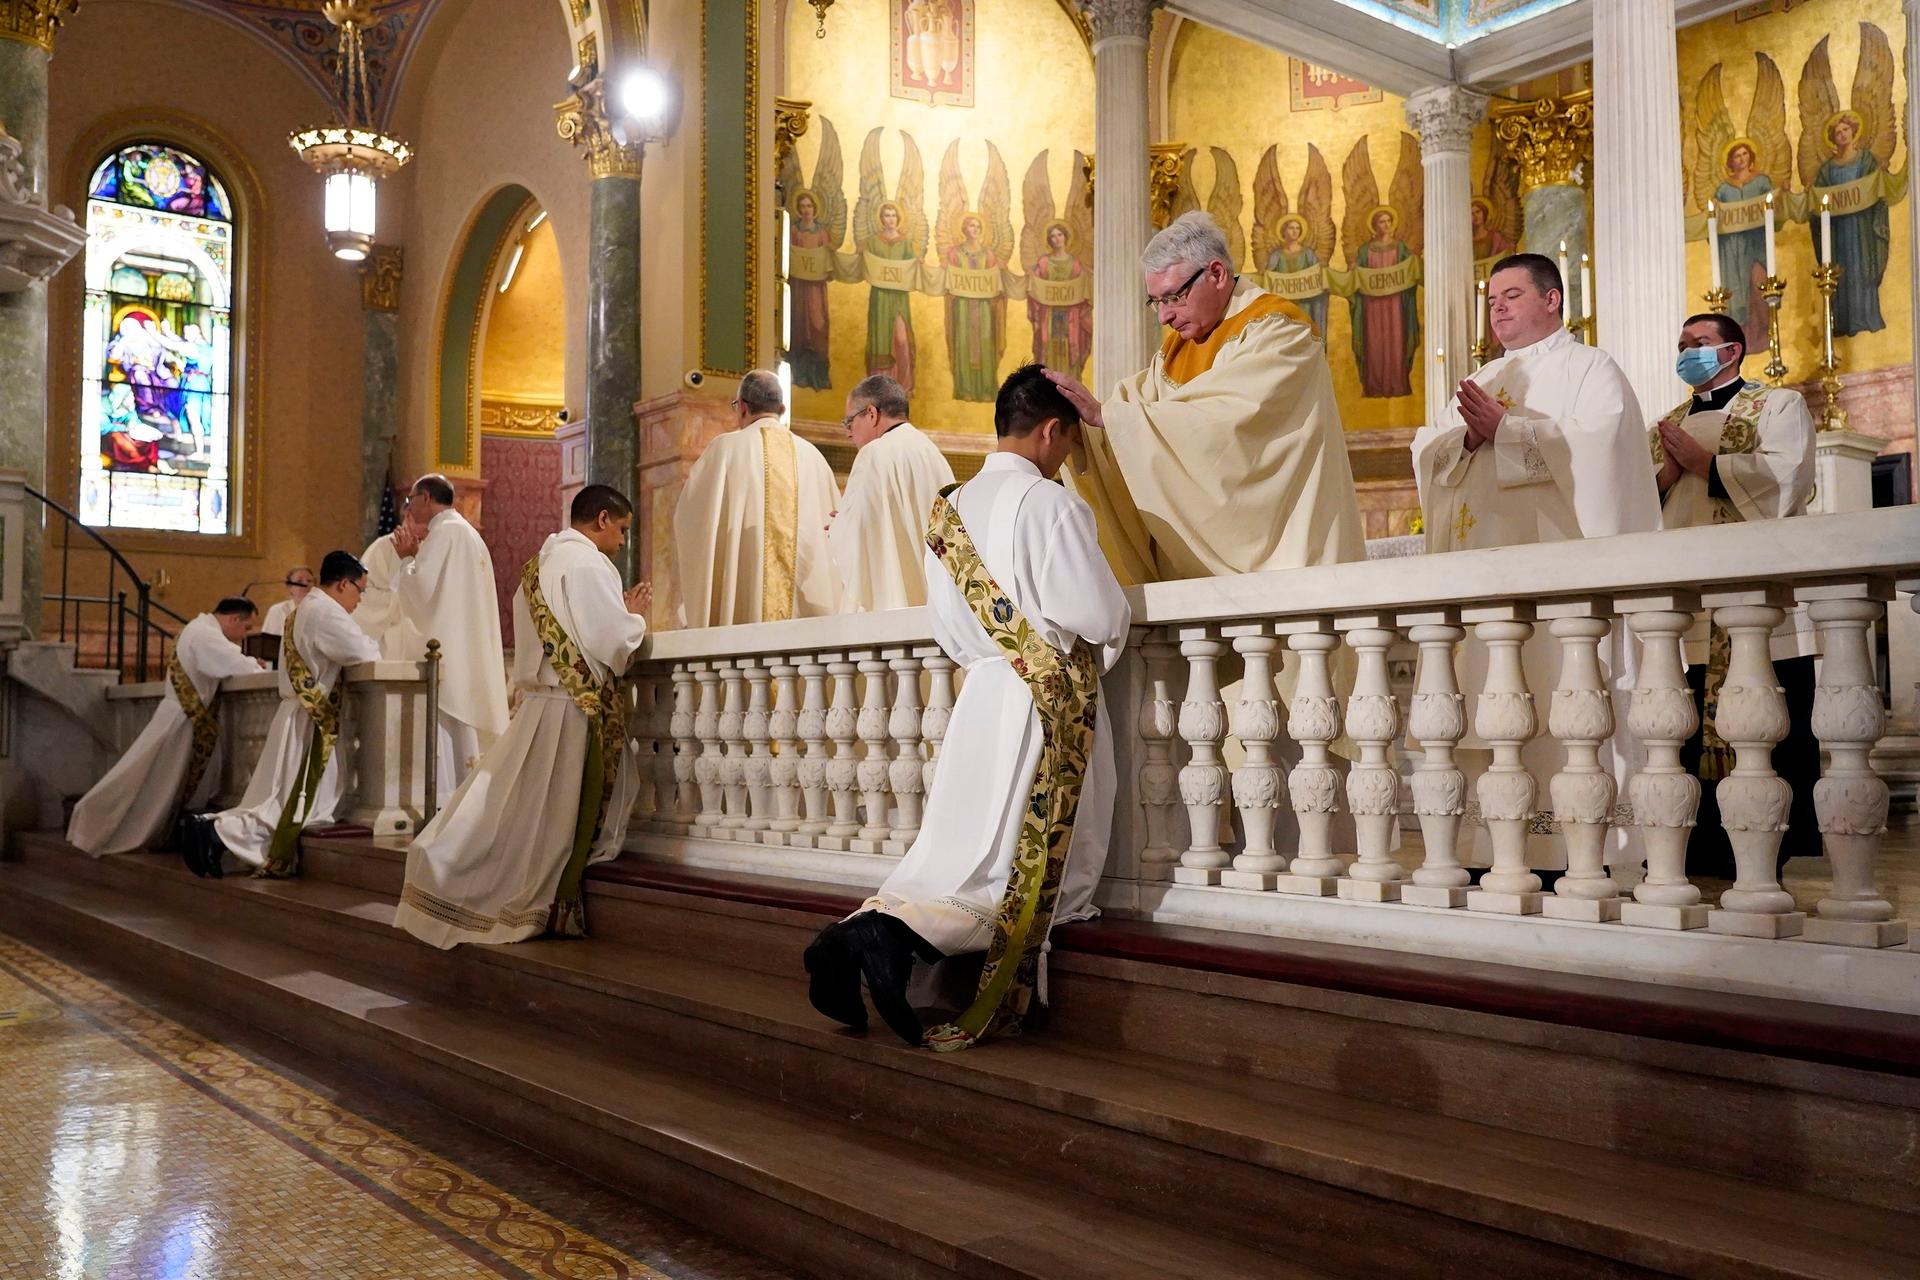 Ordination survey finds dropping percentages of new white U.S. priests